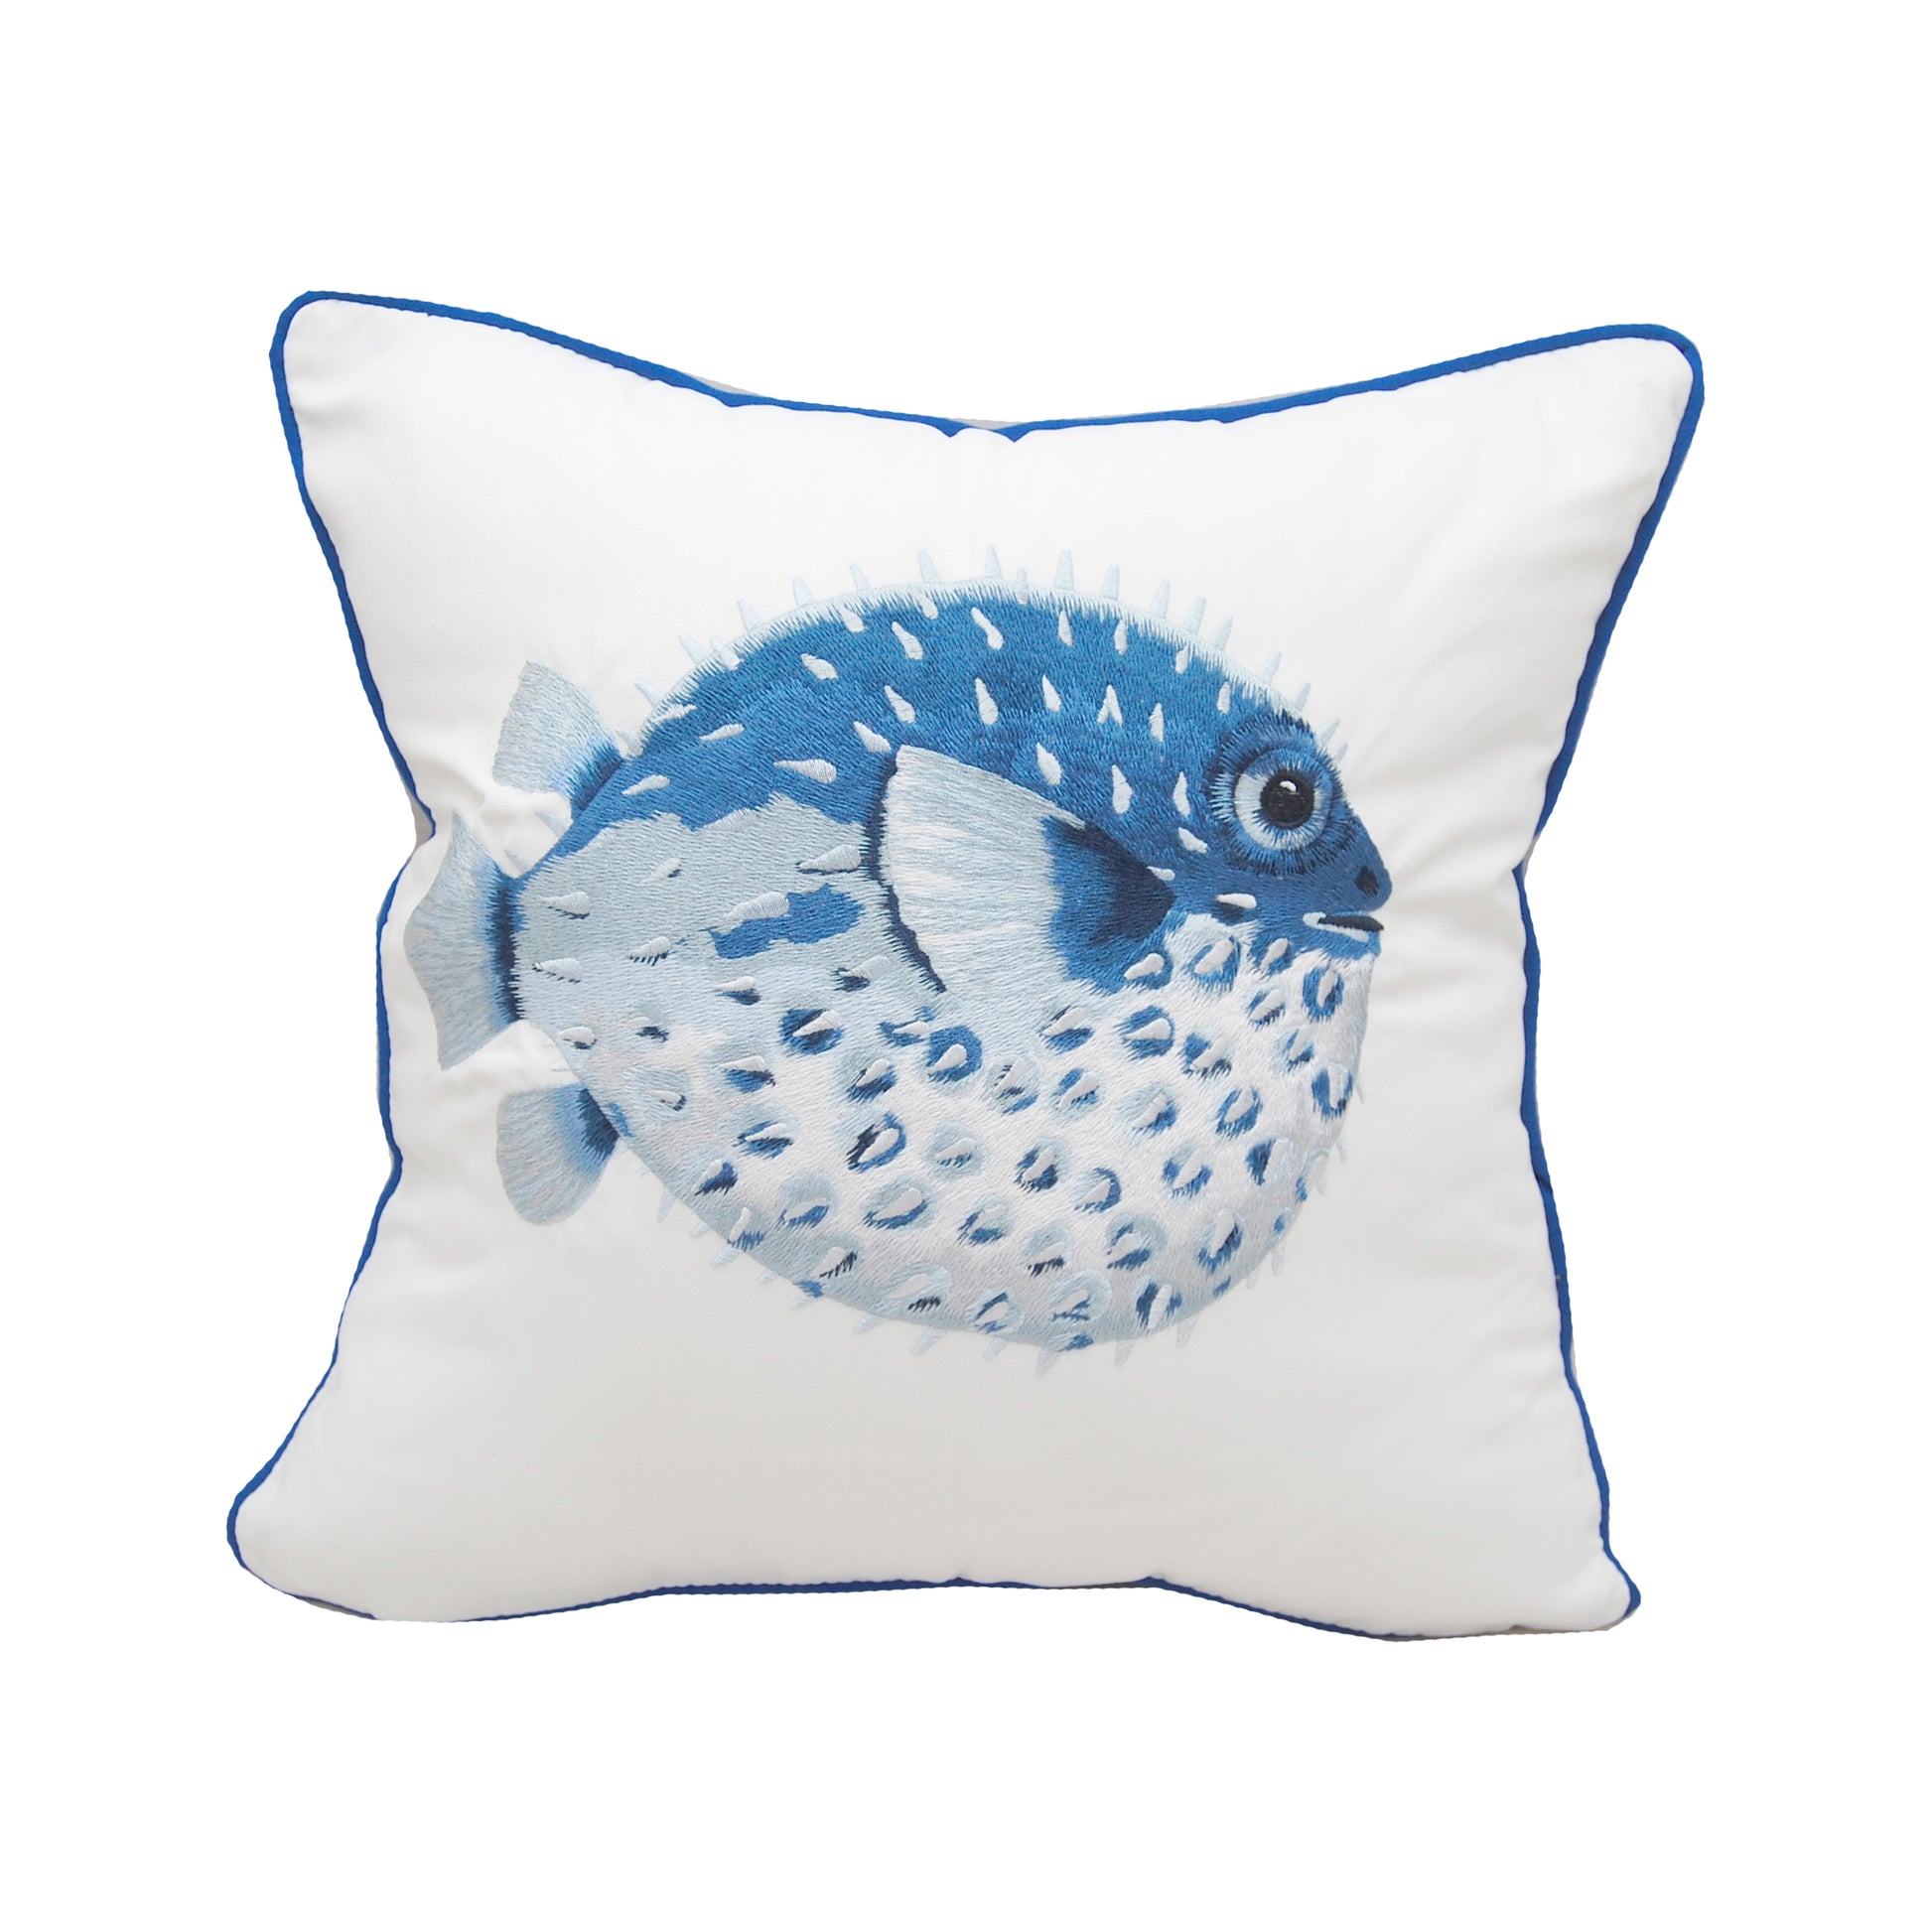 A large pufferfish embroidered in blues and greys on a white background. Pillow is finished with blue piped edging.